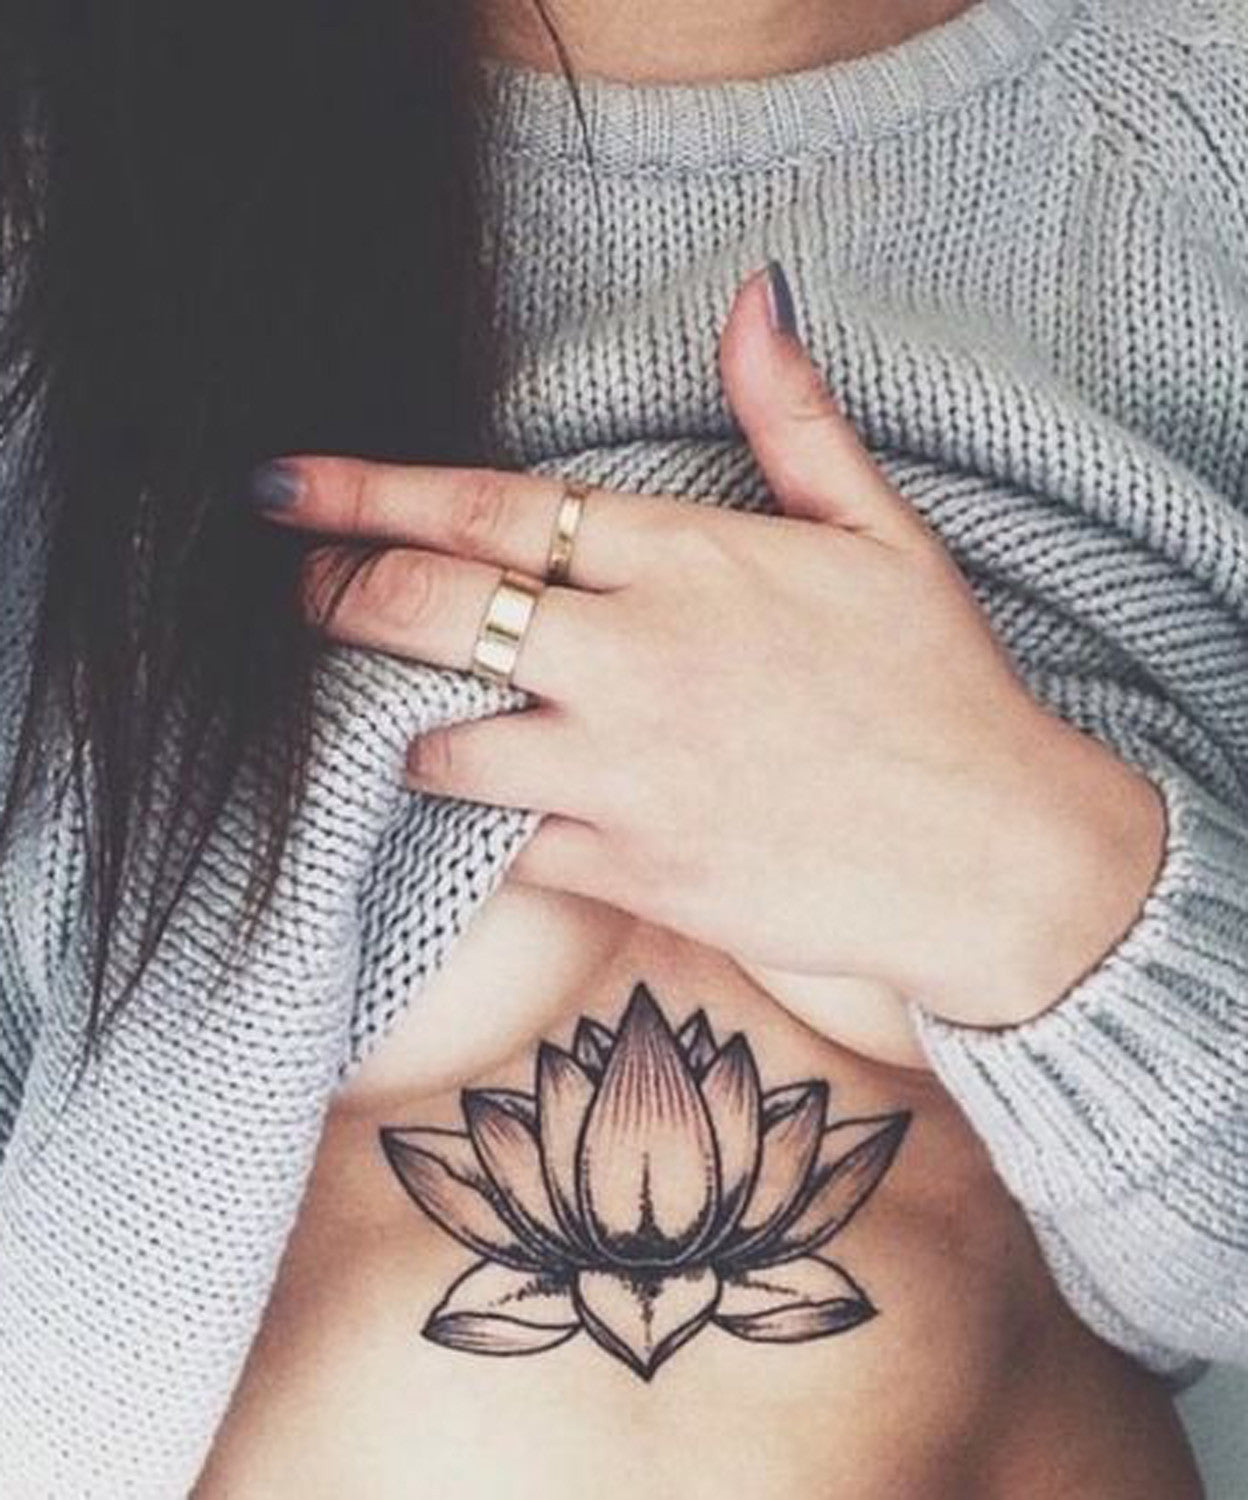 Lotus Floral Flower Underboob Tattoo Placement Ideas for Women at MyBodiArt.com 